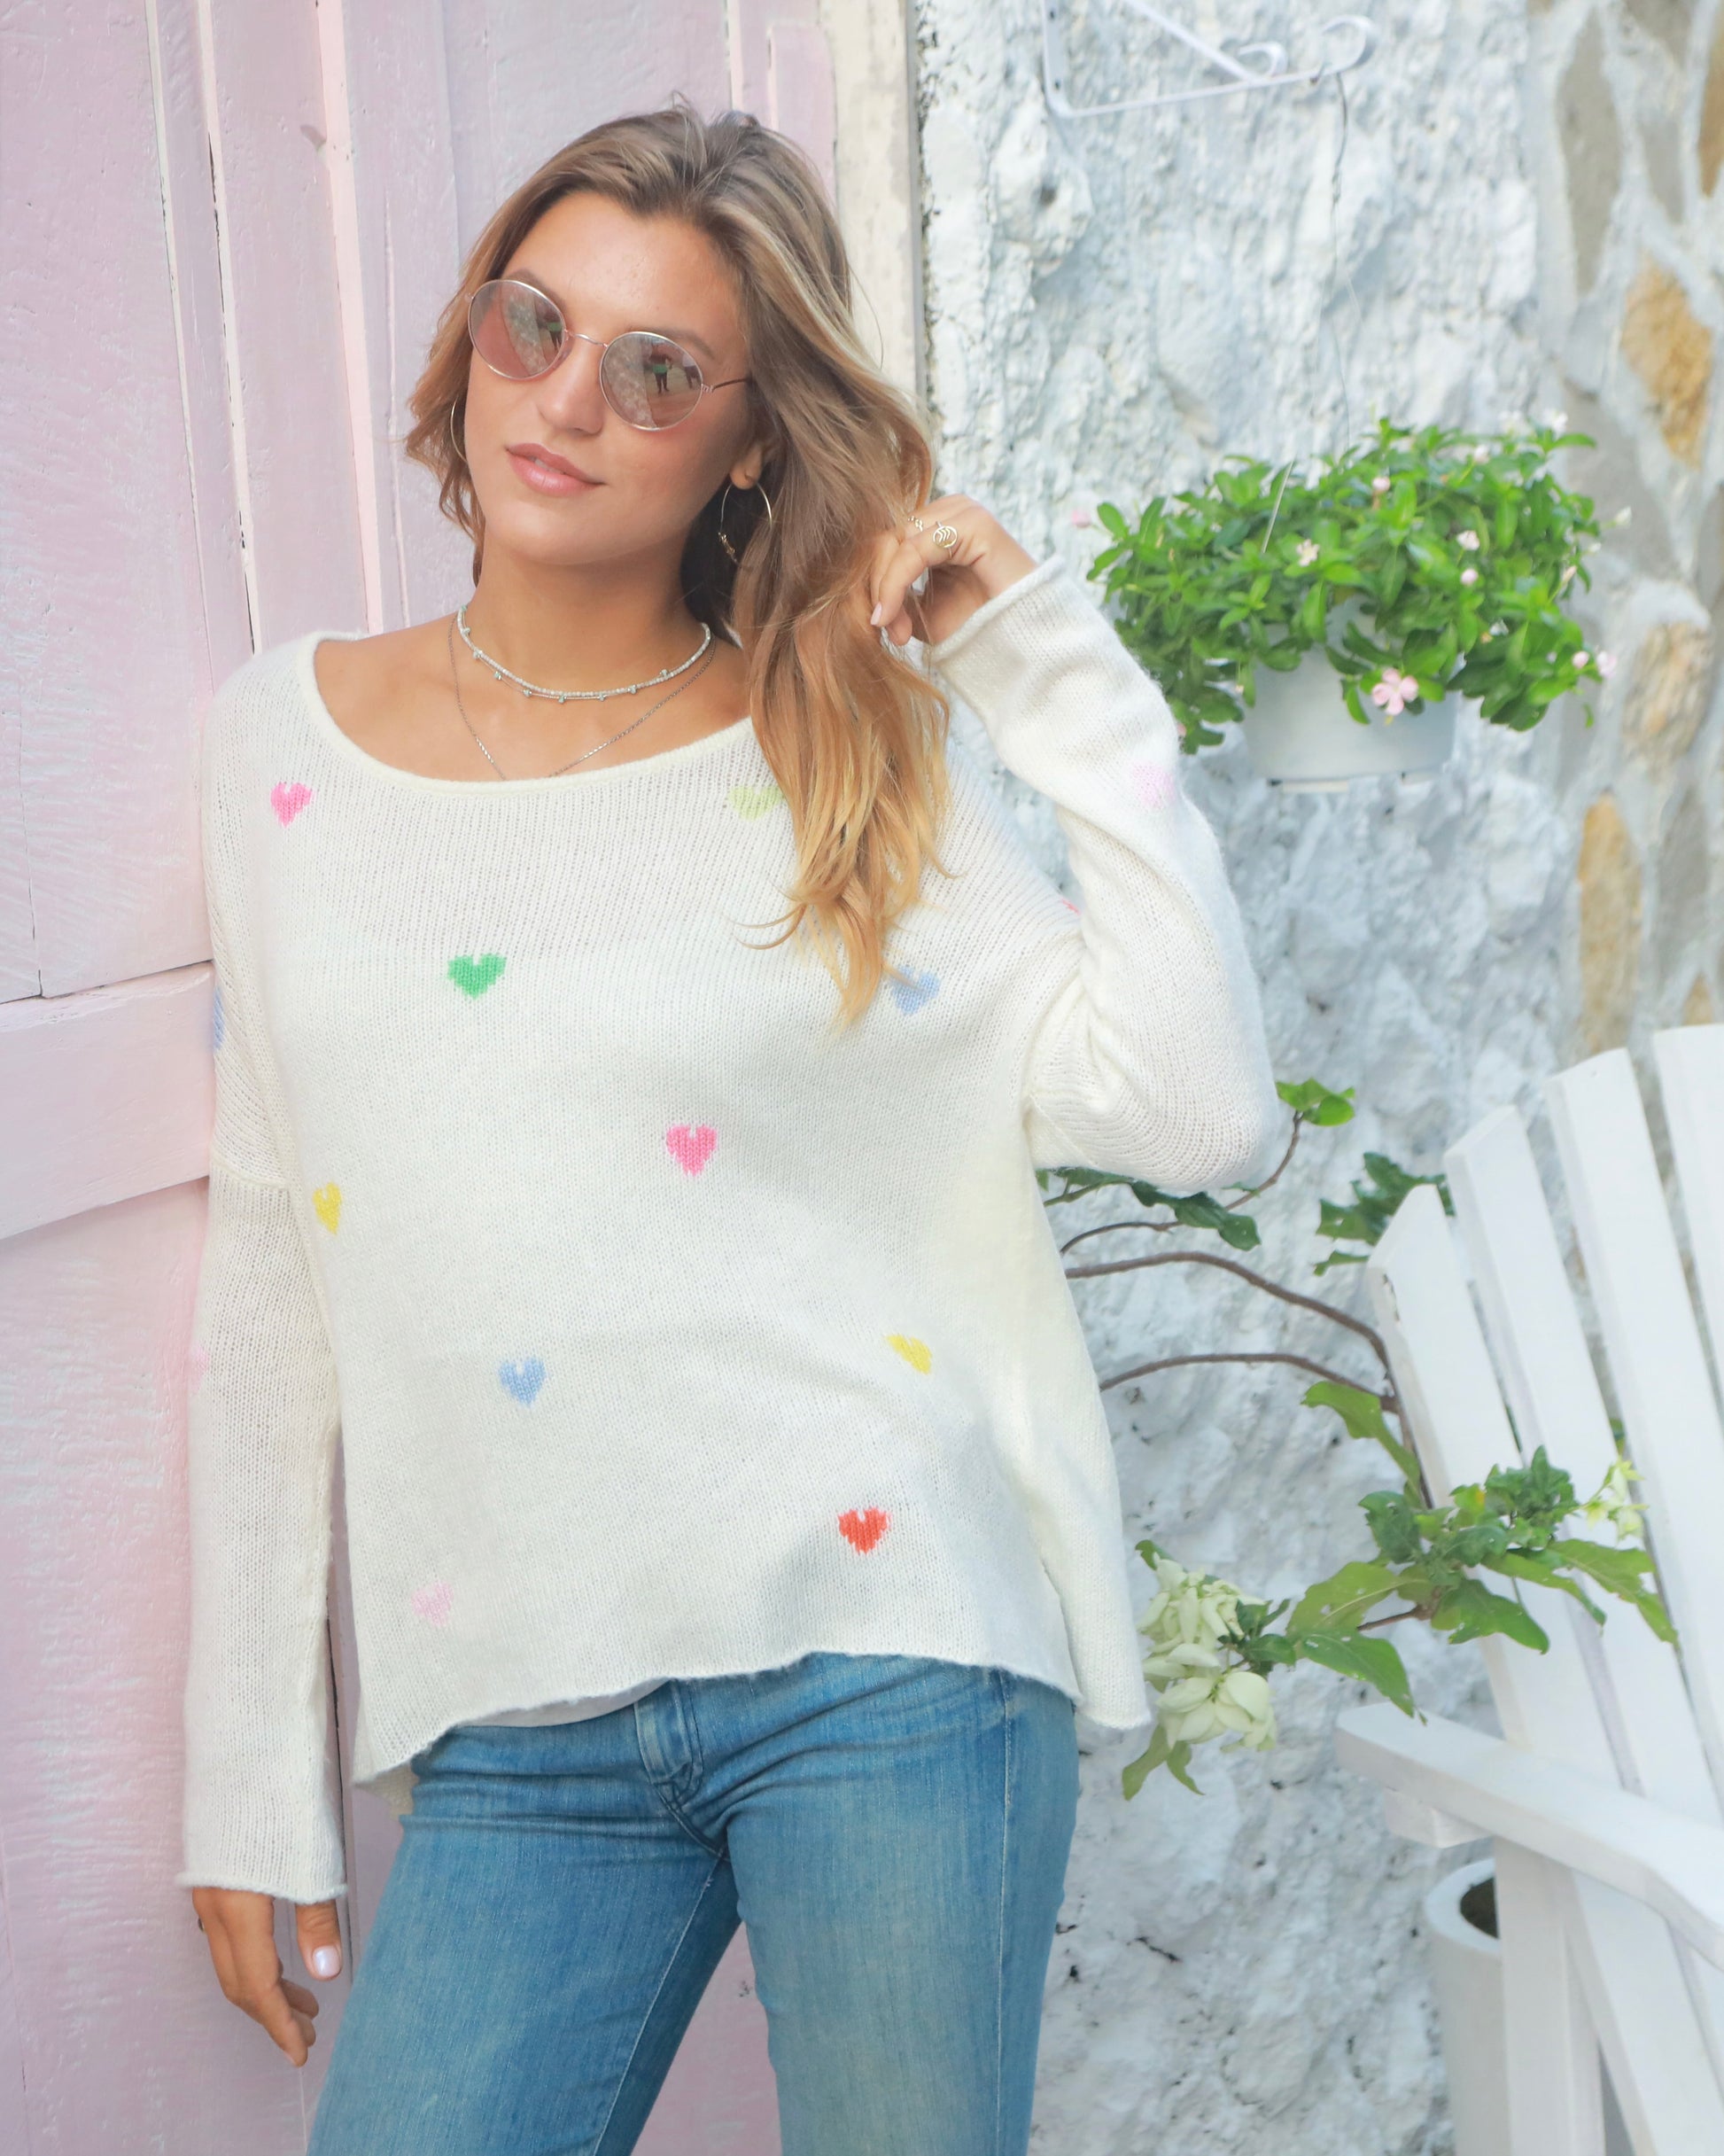 Model wearing Wooden Ships Rainbow Hearts Crew sweater wearing jeans and sunglasses standing outside against a pink door